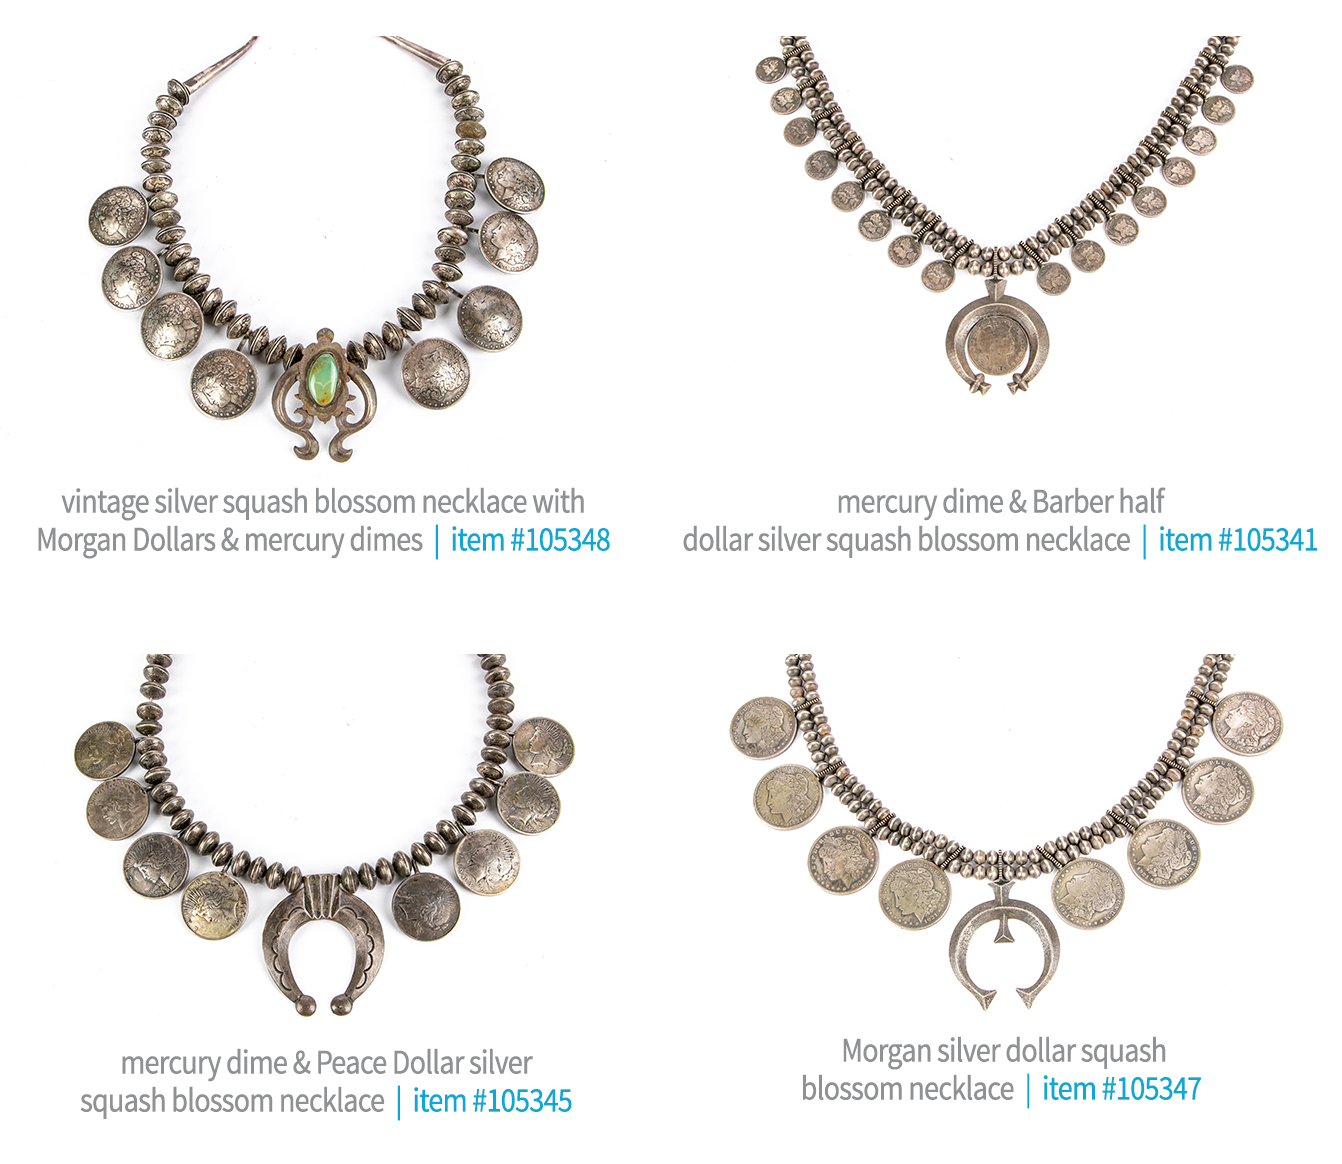 Additional Squash Blossom Necklaces in Native American & Western Collection Sale